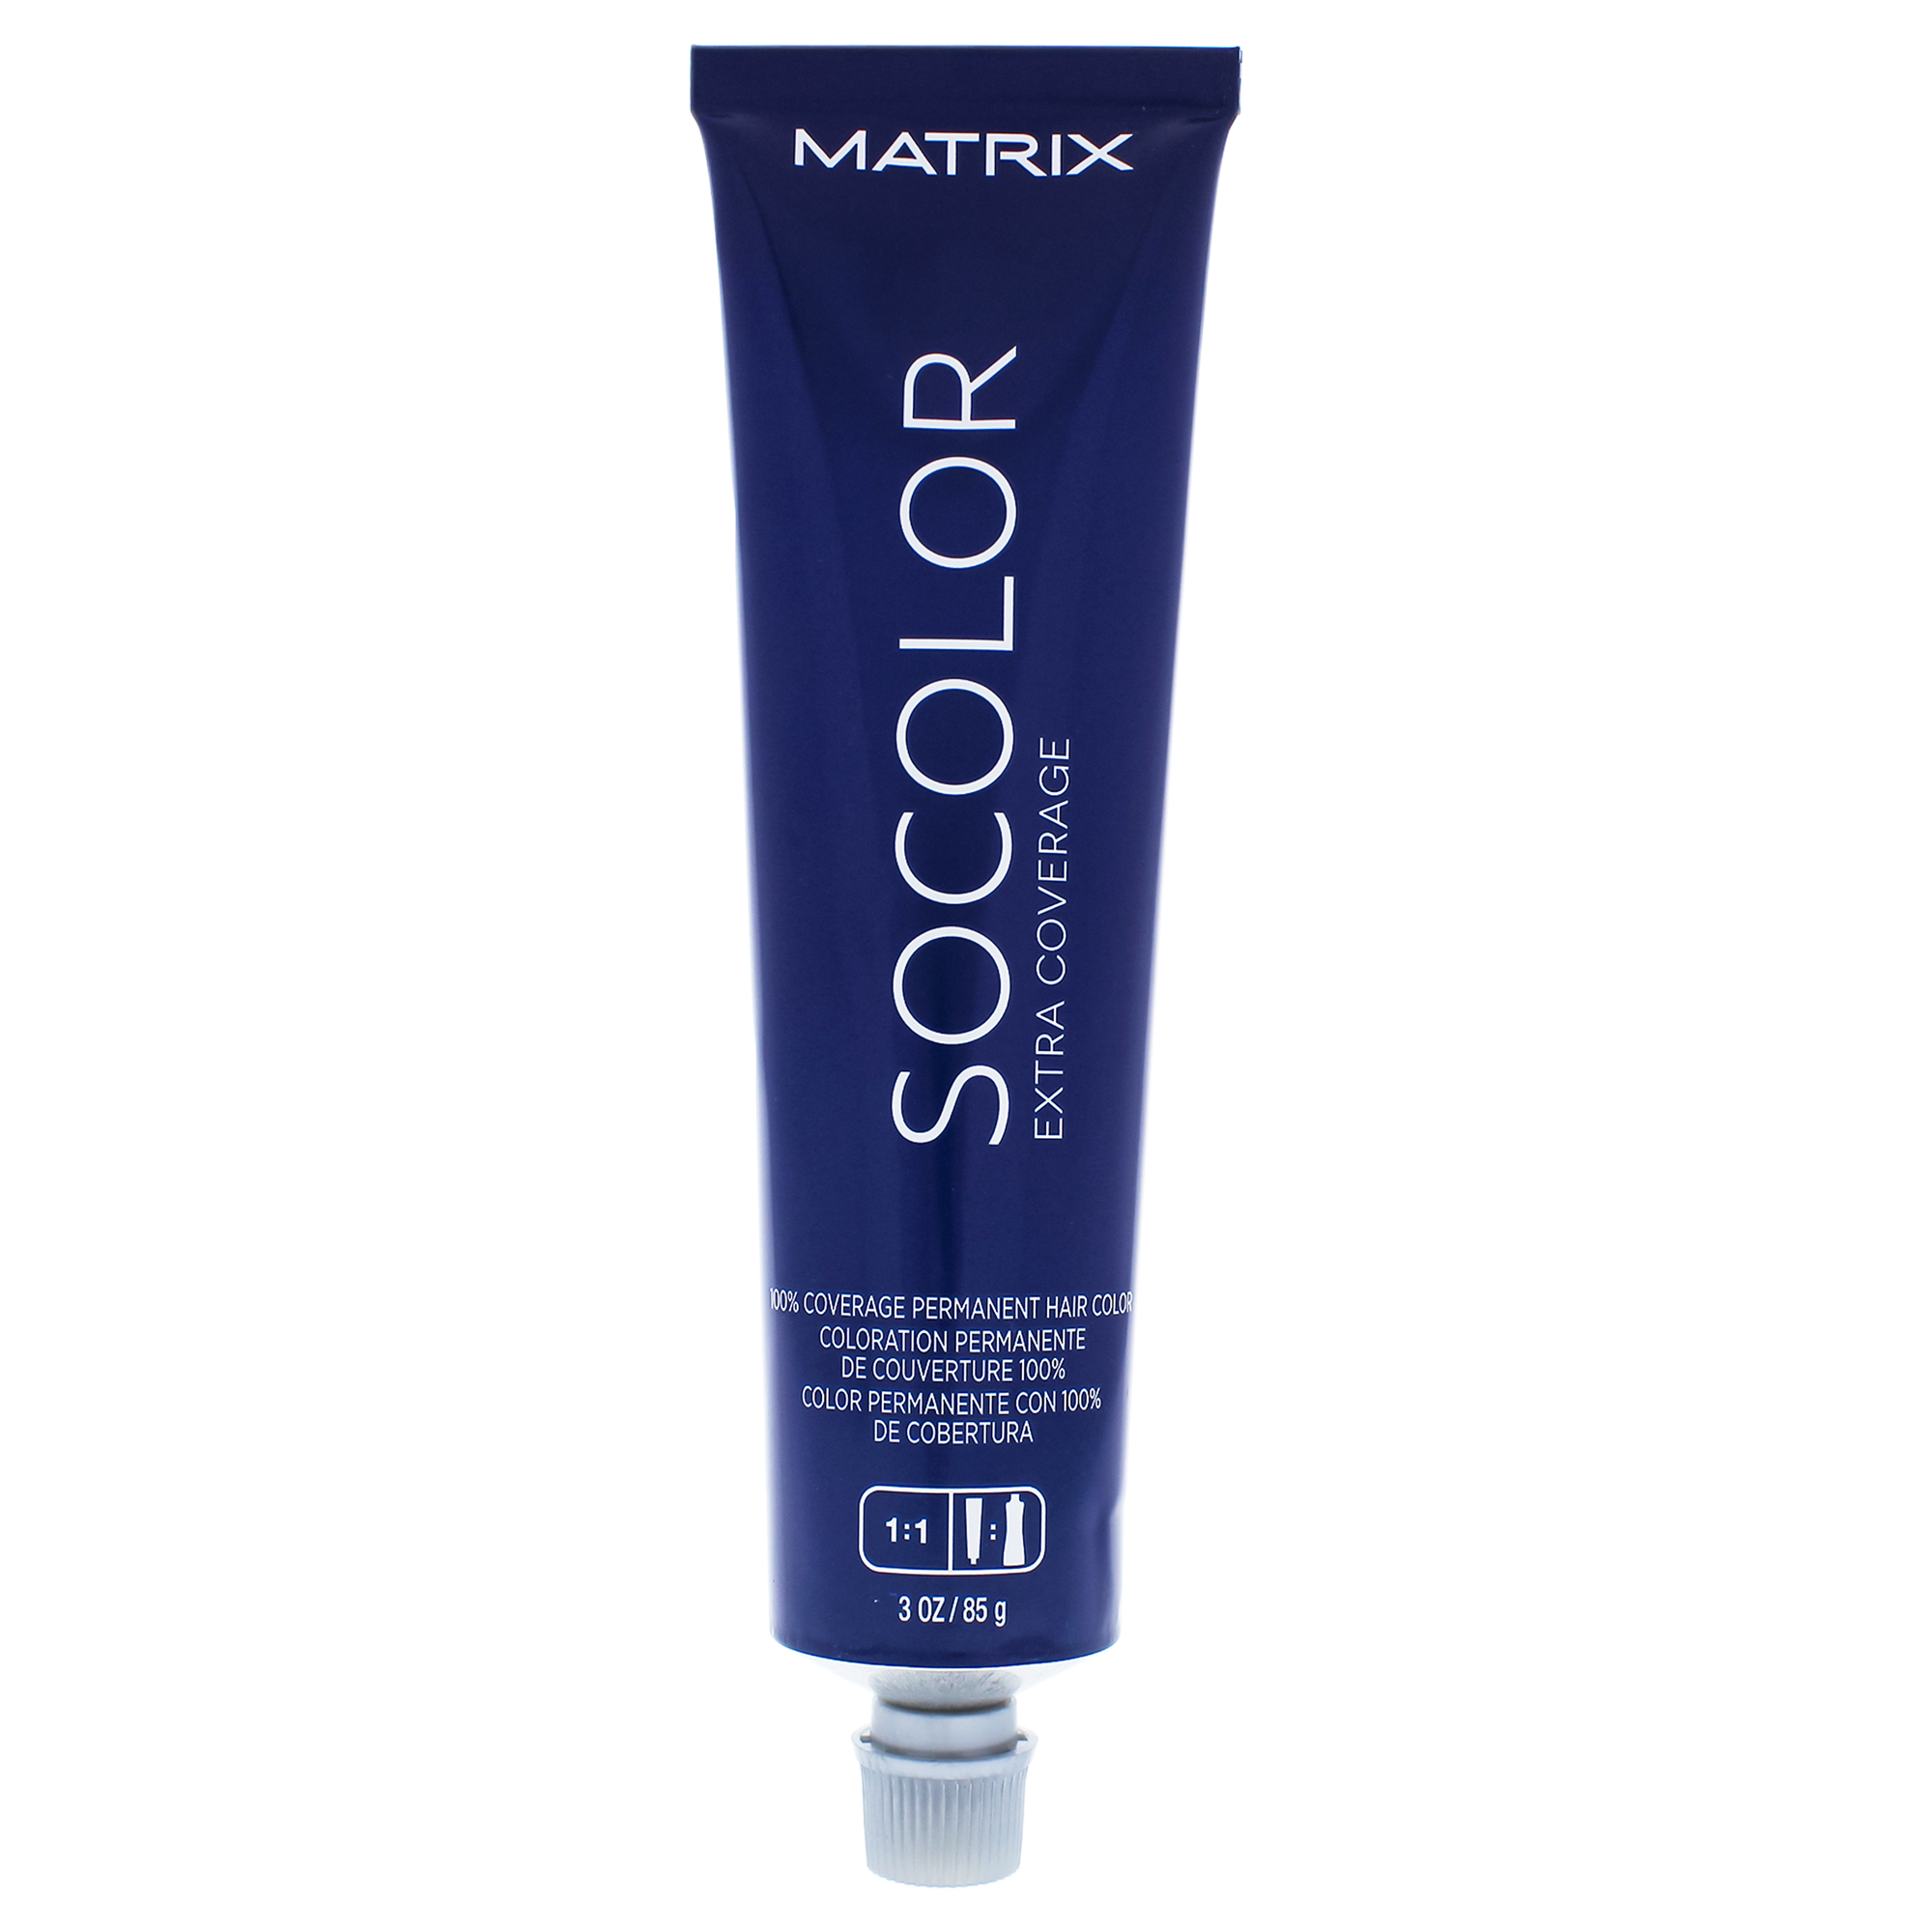 Matrix Socolor Extra Coverage Hair Color 506N - Light Brown Neutral Extra Coverage by Matrix for Unisex - 3 oz Hair Color - image 1 of 2